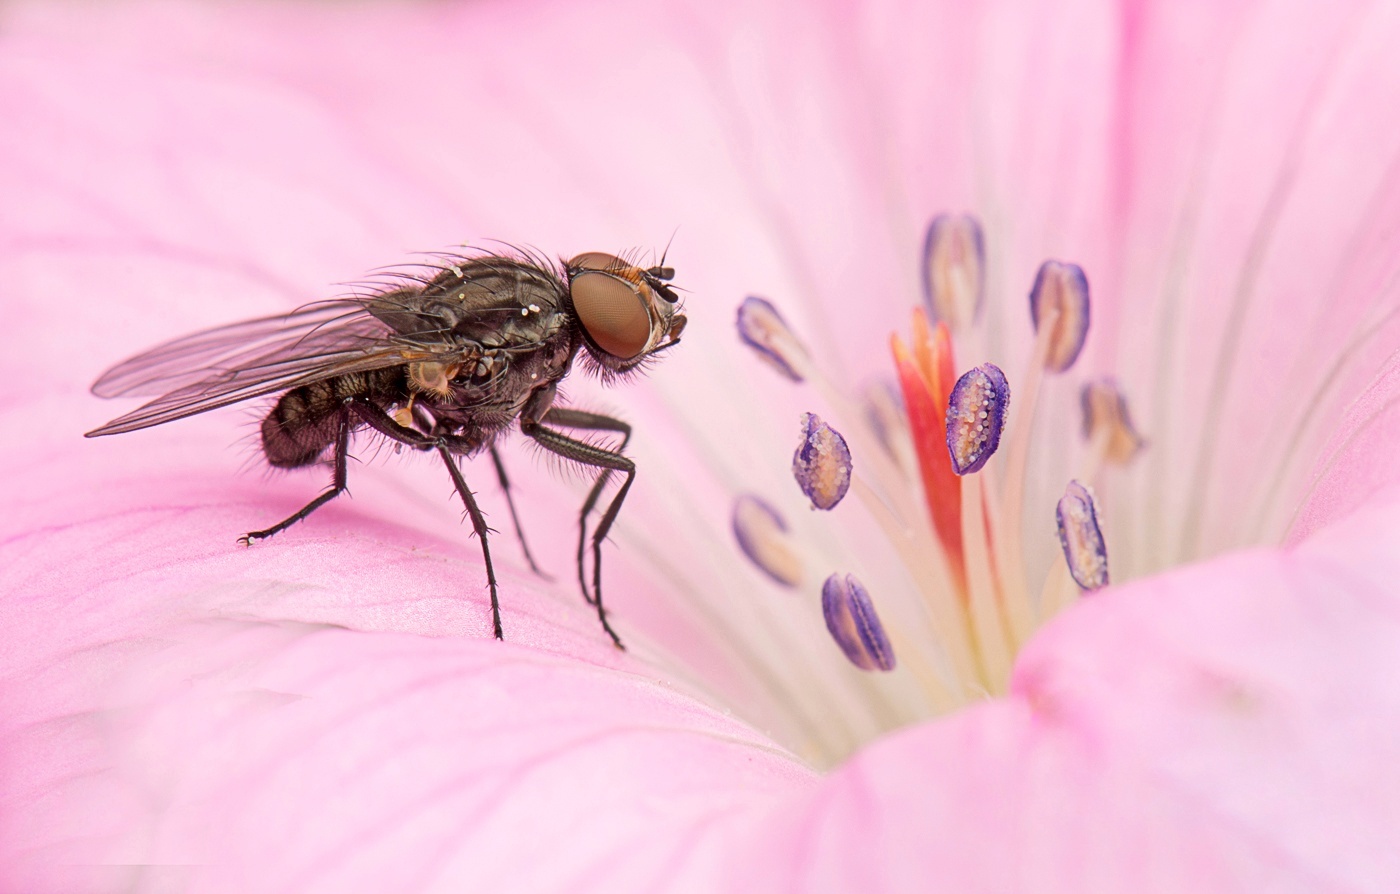 Beauty and the beast - a fly on a wild geranium flower